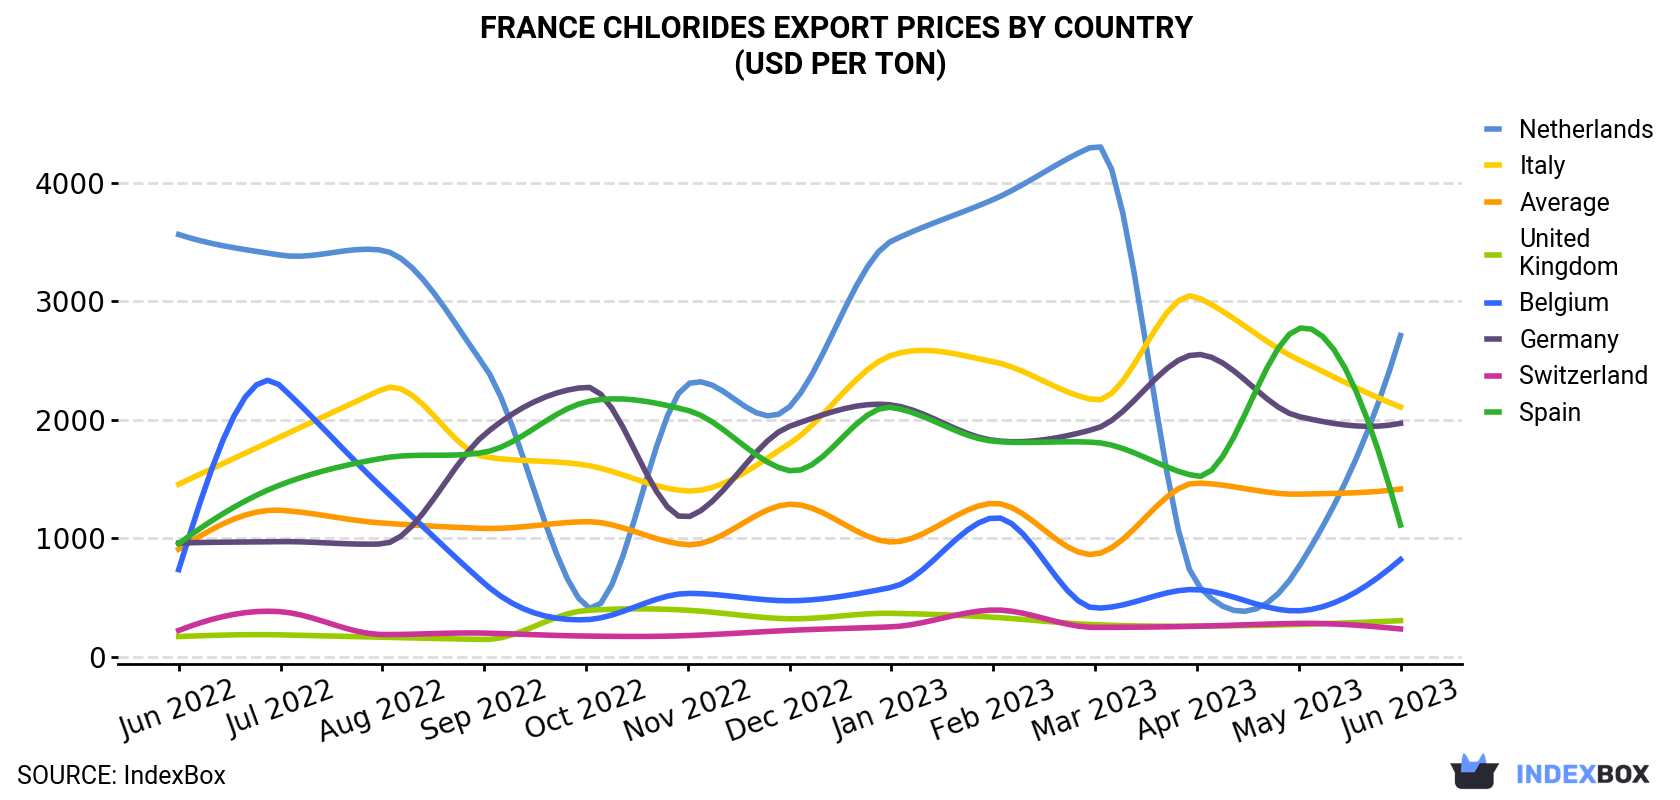 France Chlorides Export Prices By Country (USD Per Ton)